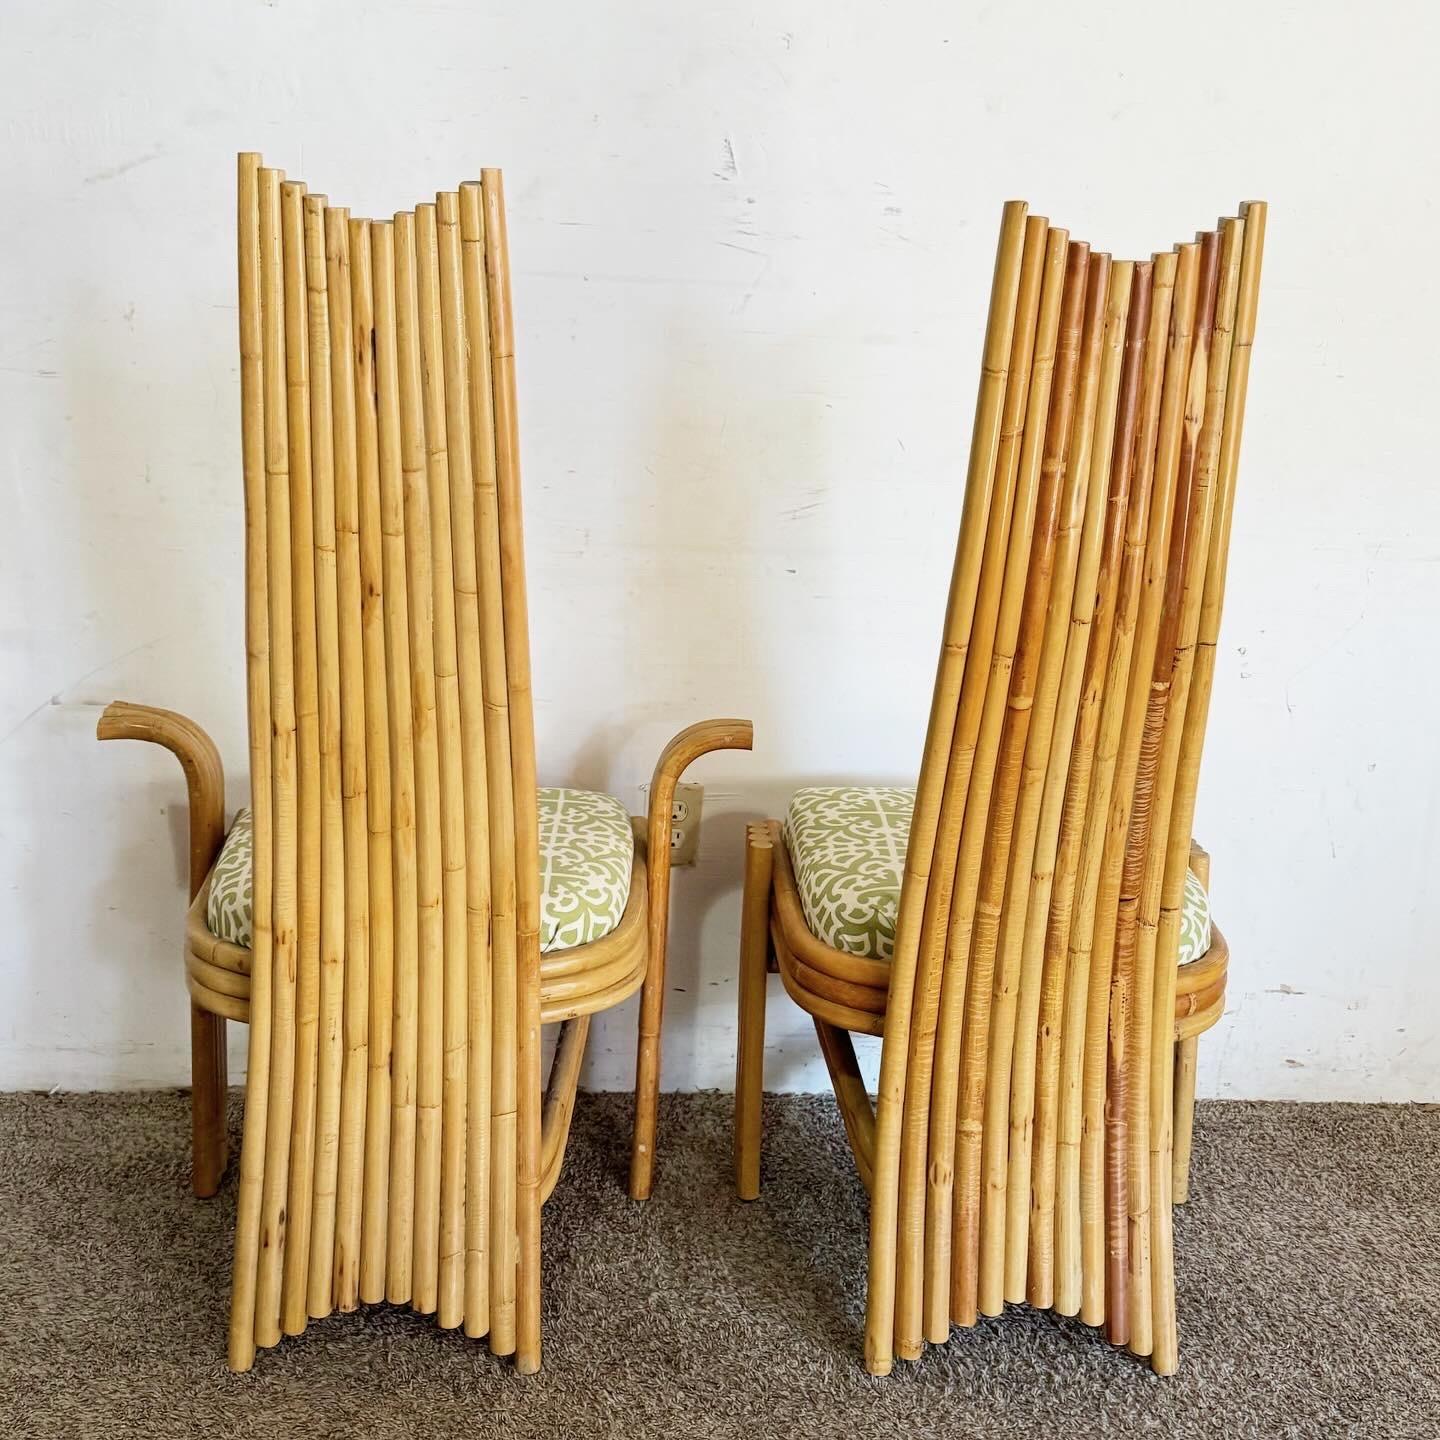 1970s Vintage Boho Chic High Back Bamboo Dining Chairs - Set of 6 For Sale 3